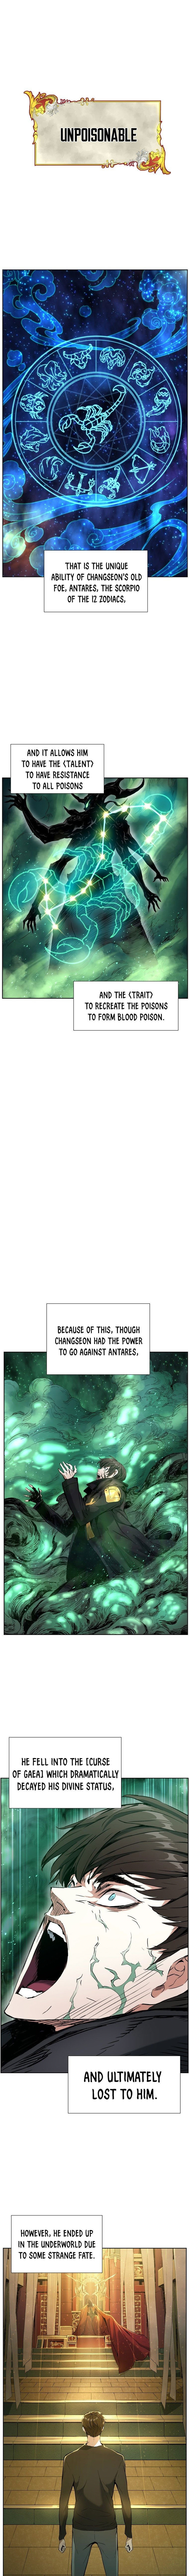 return-of-the-shattered-constellation-chap-9-1